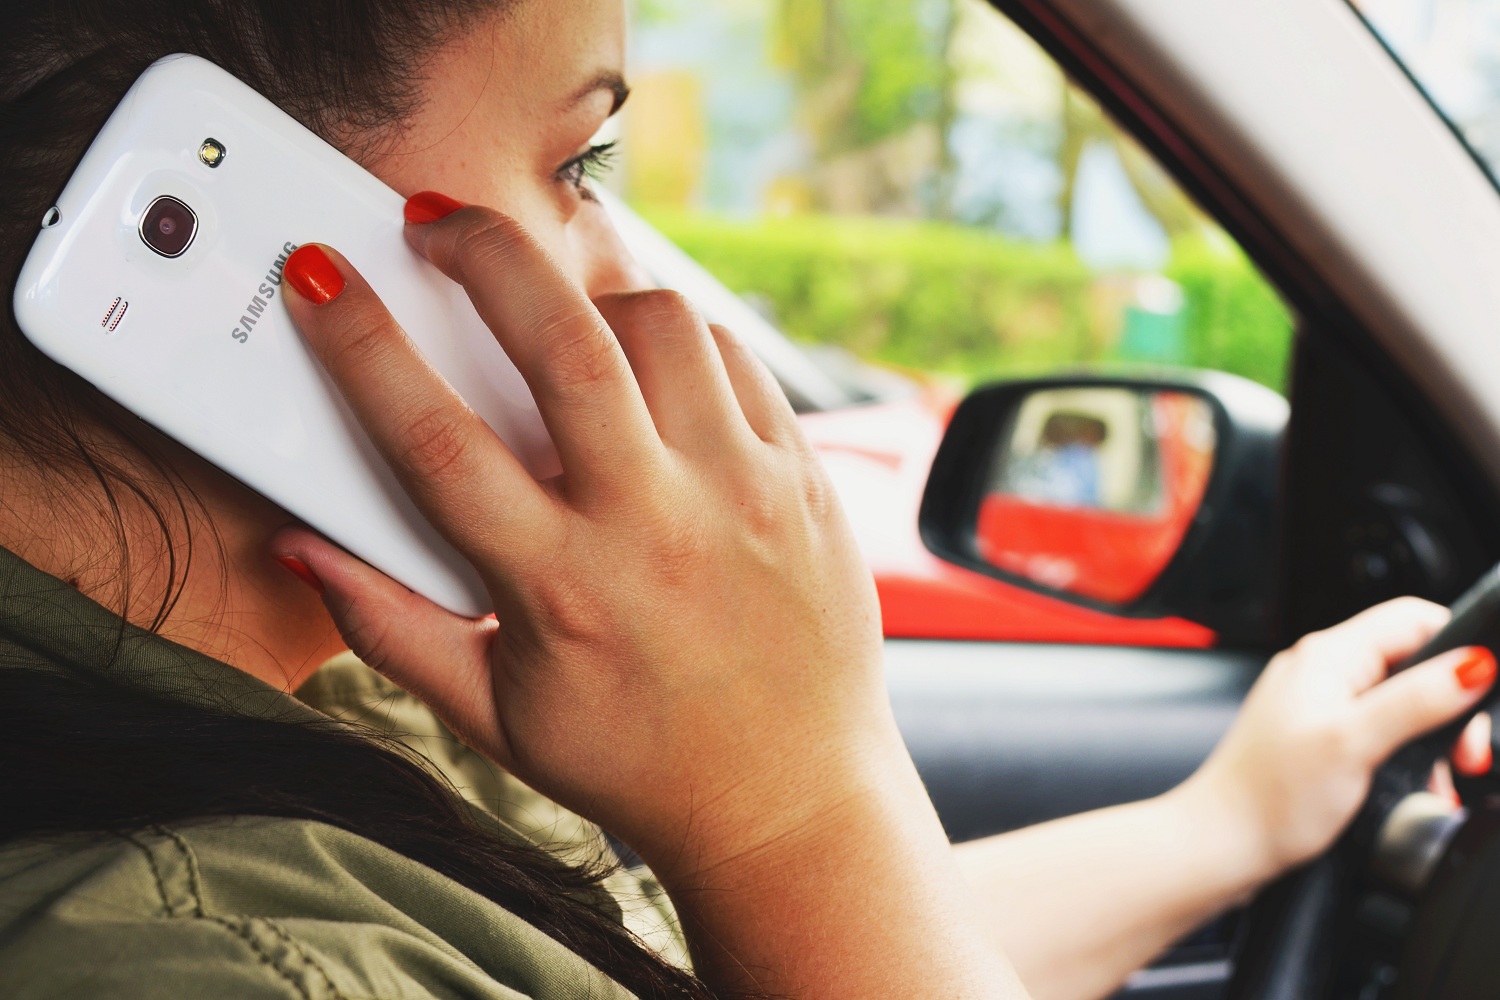 • Texting and Listening Calls While Driving